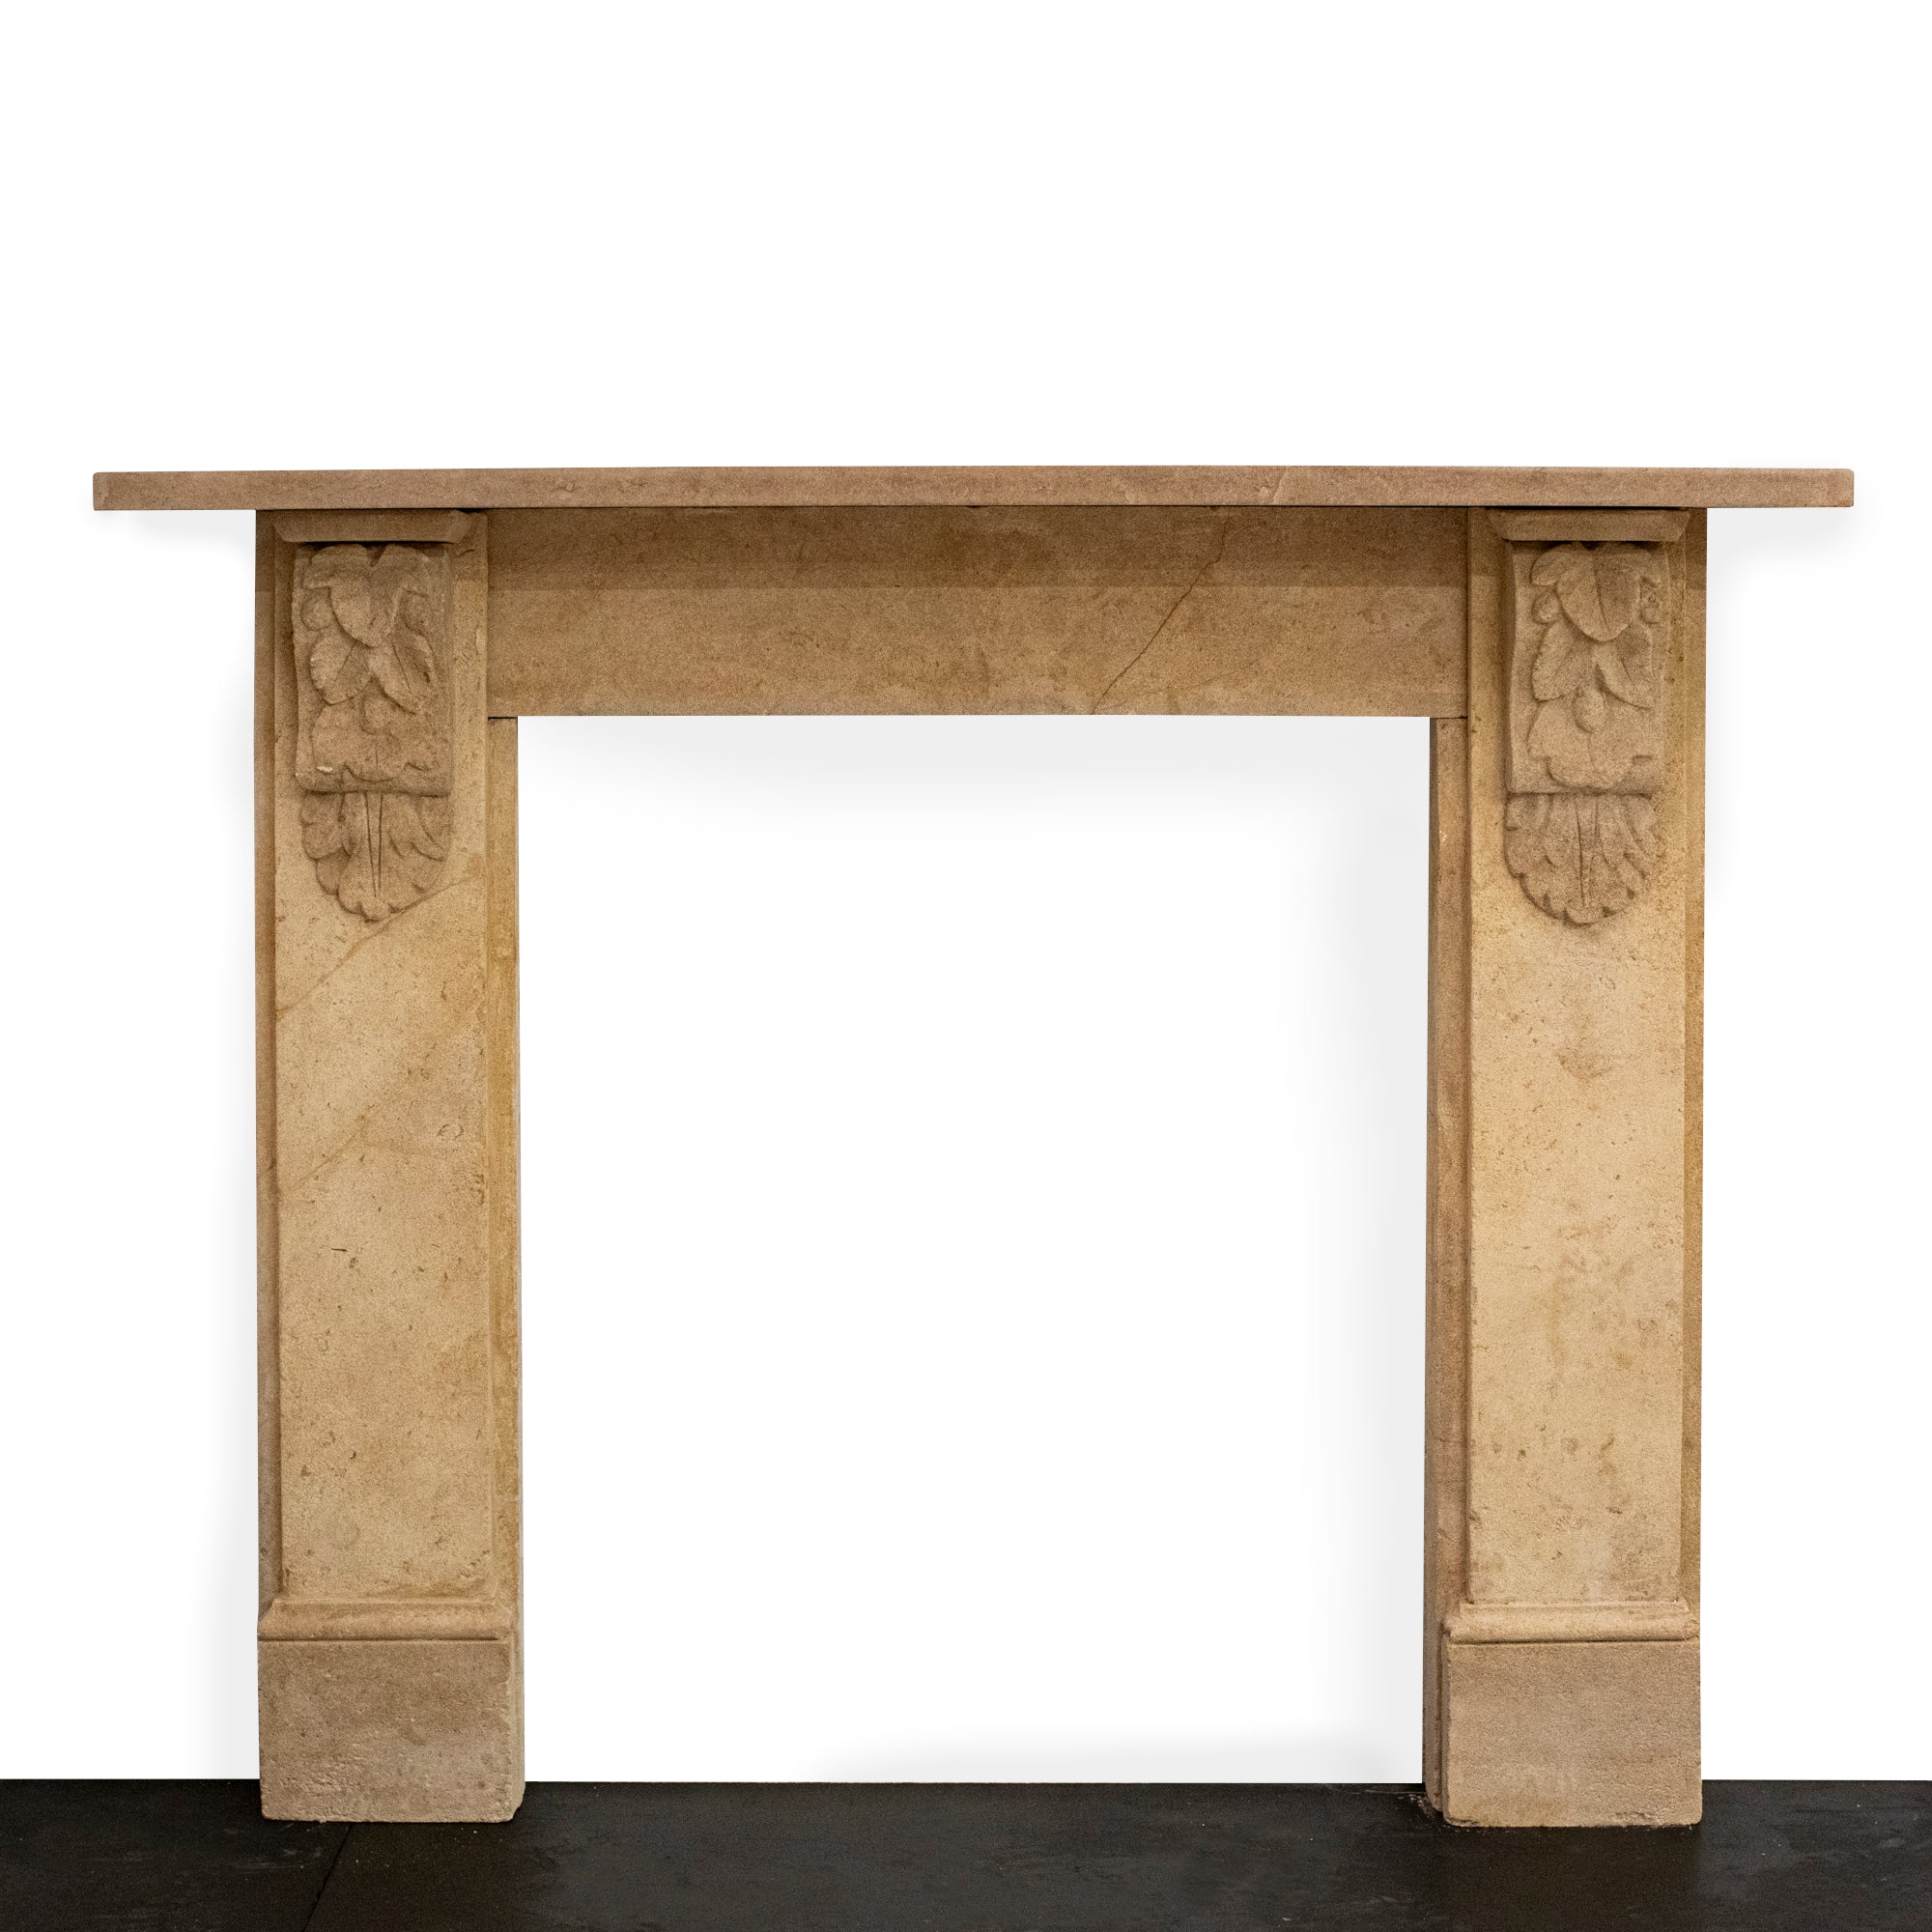 Antique Victorian Bath Stone Surround with Leaf Carved Corbels | The Architectural Forum